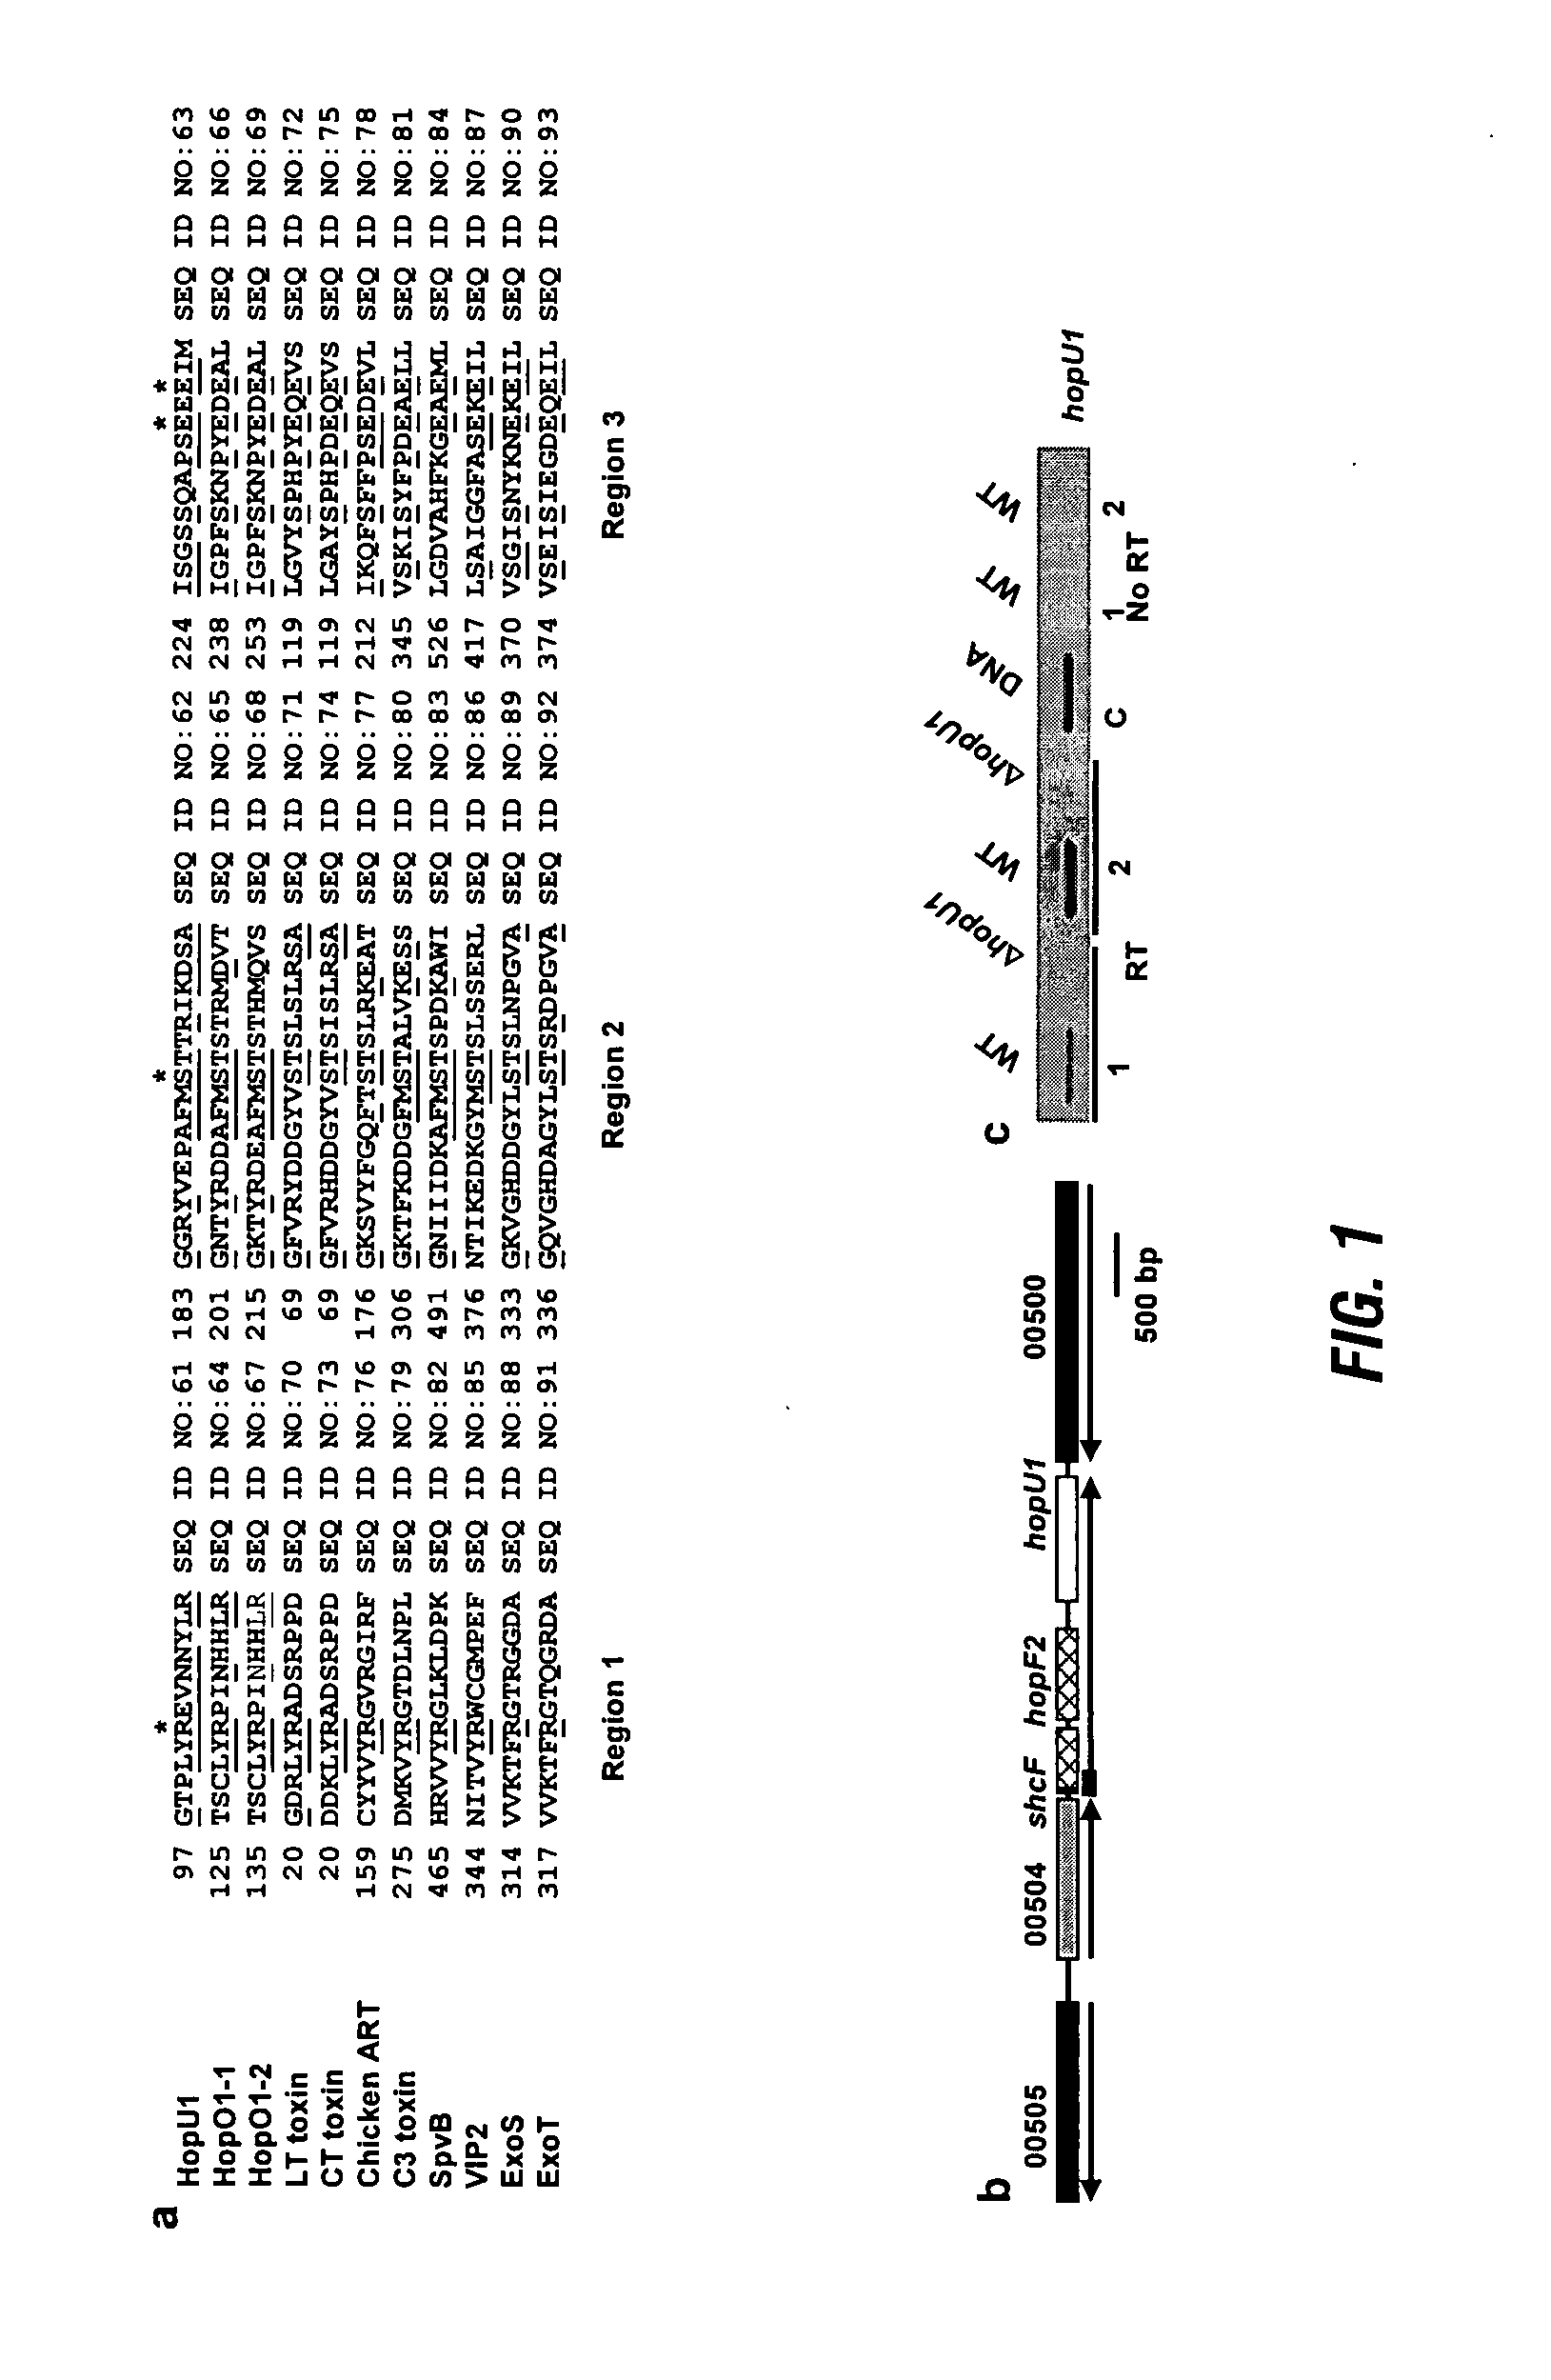 USES OF THE PSEUDOMONAS SYRINGAE EFFECTOR PROTEIN HopU1 RELATED TO ITS ABILITY TO ADP-RIBOSYLATE EUKARYOTIC RNA BINDING PROTEINS